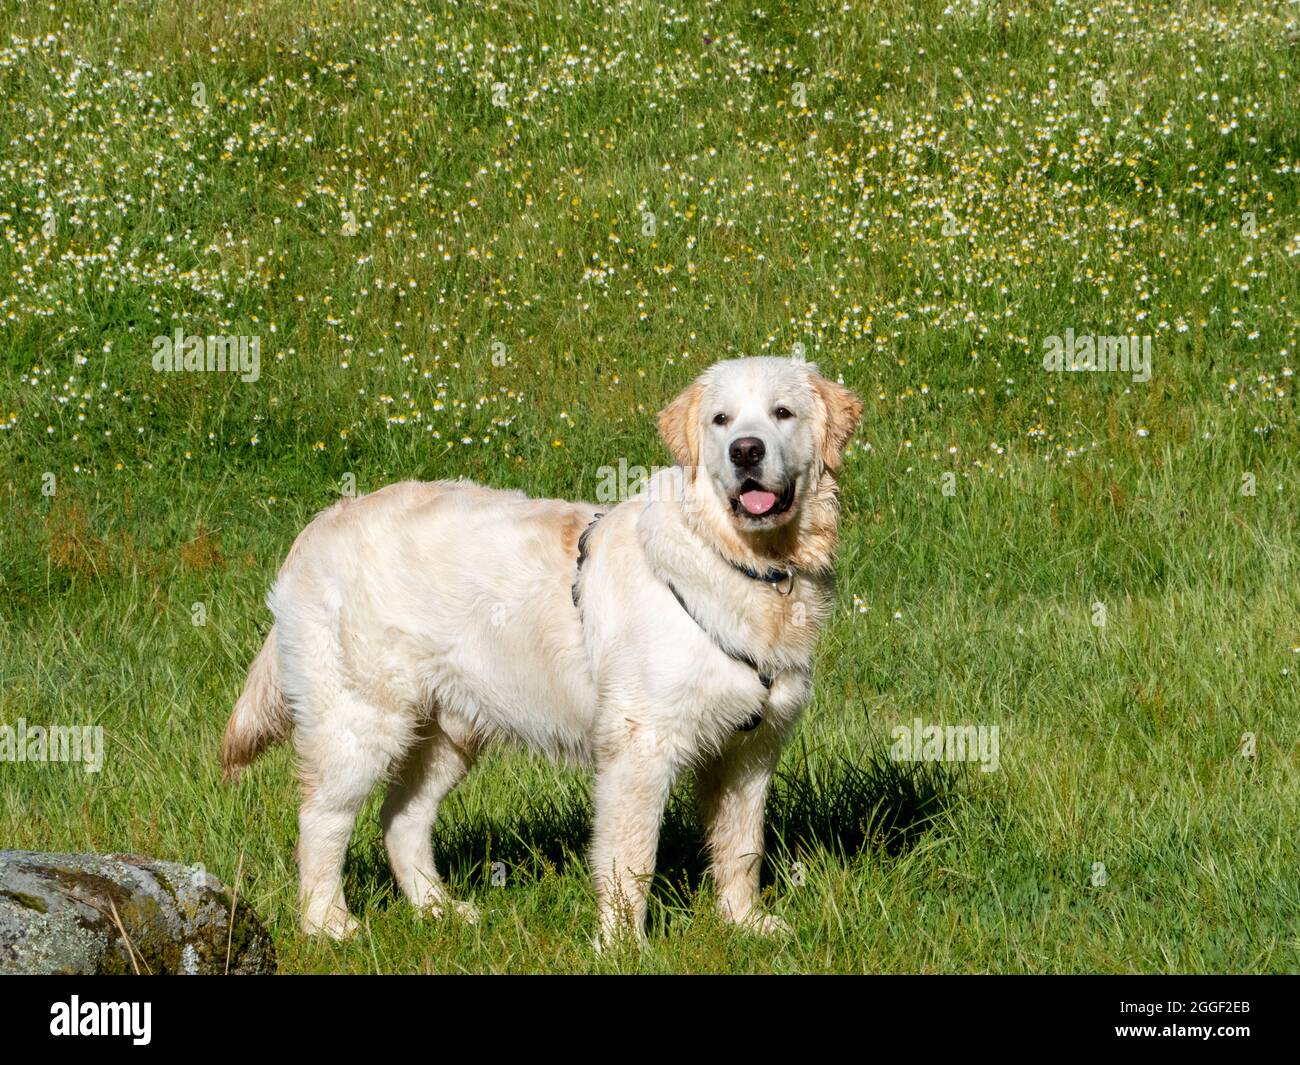 Front view of a dog standing and looking straight ahead in a meadow. Beautiful dog standing in grassy field. Stock Photo